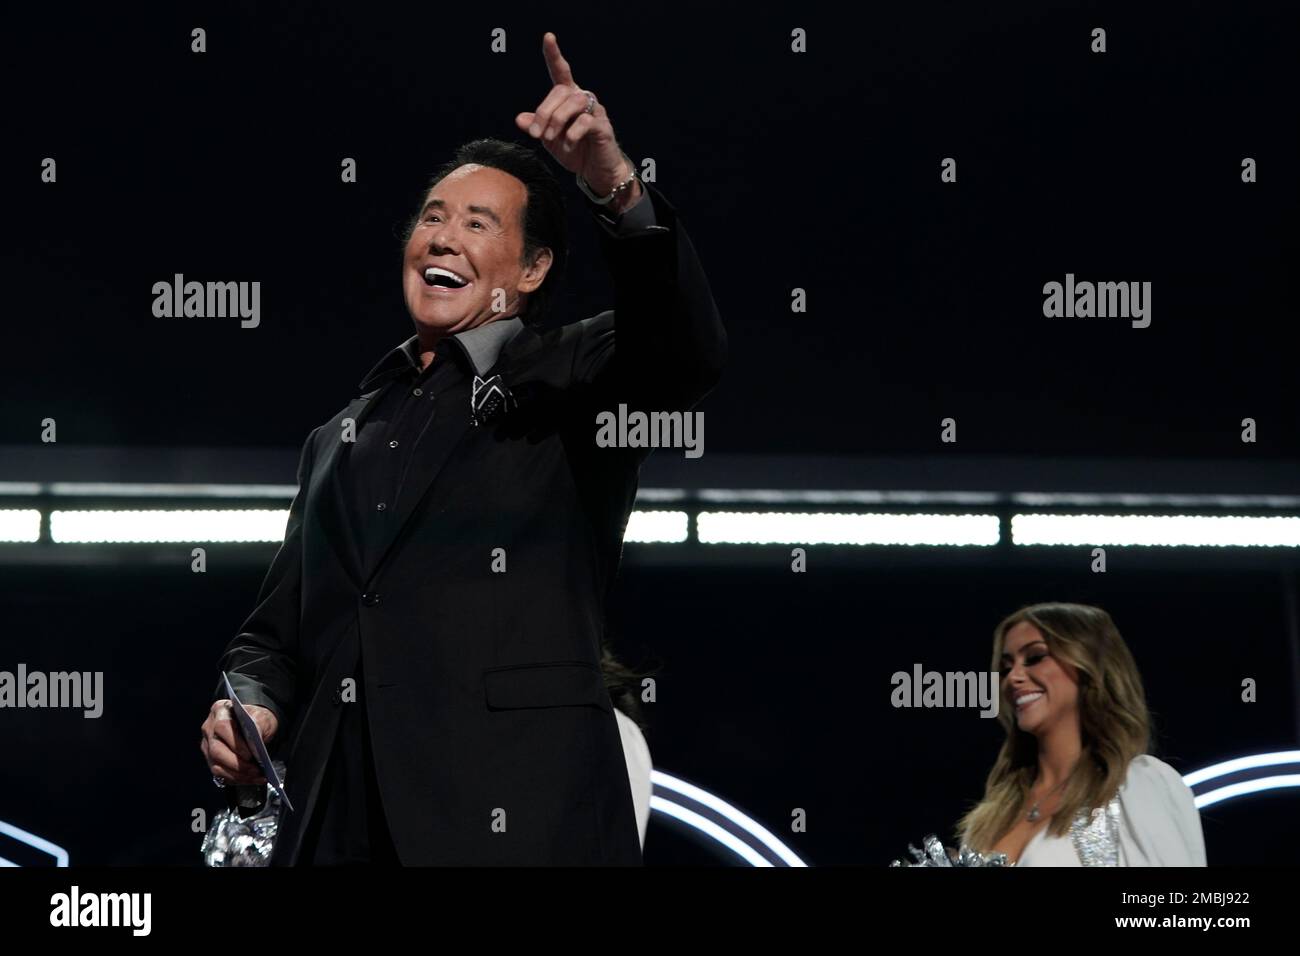 Singer Wayne Newton walks up to announce Memphis offensive lineman Dylan  Parham as the Las Vegas Raiders selection during the third round of the NFL  football draft Friday, April 29, 2022, in